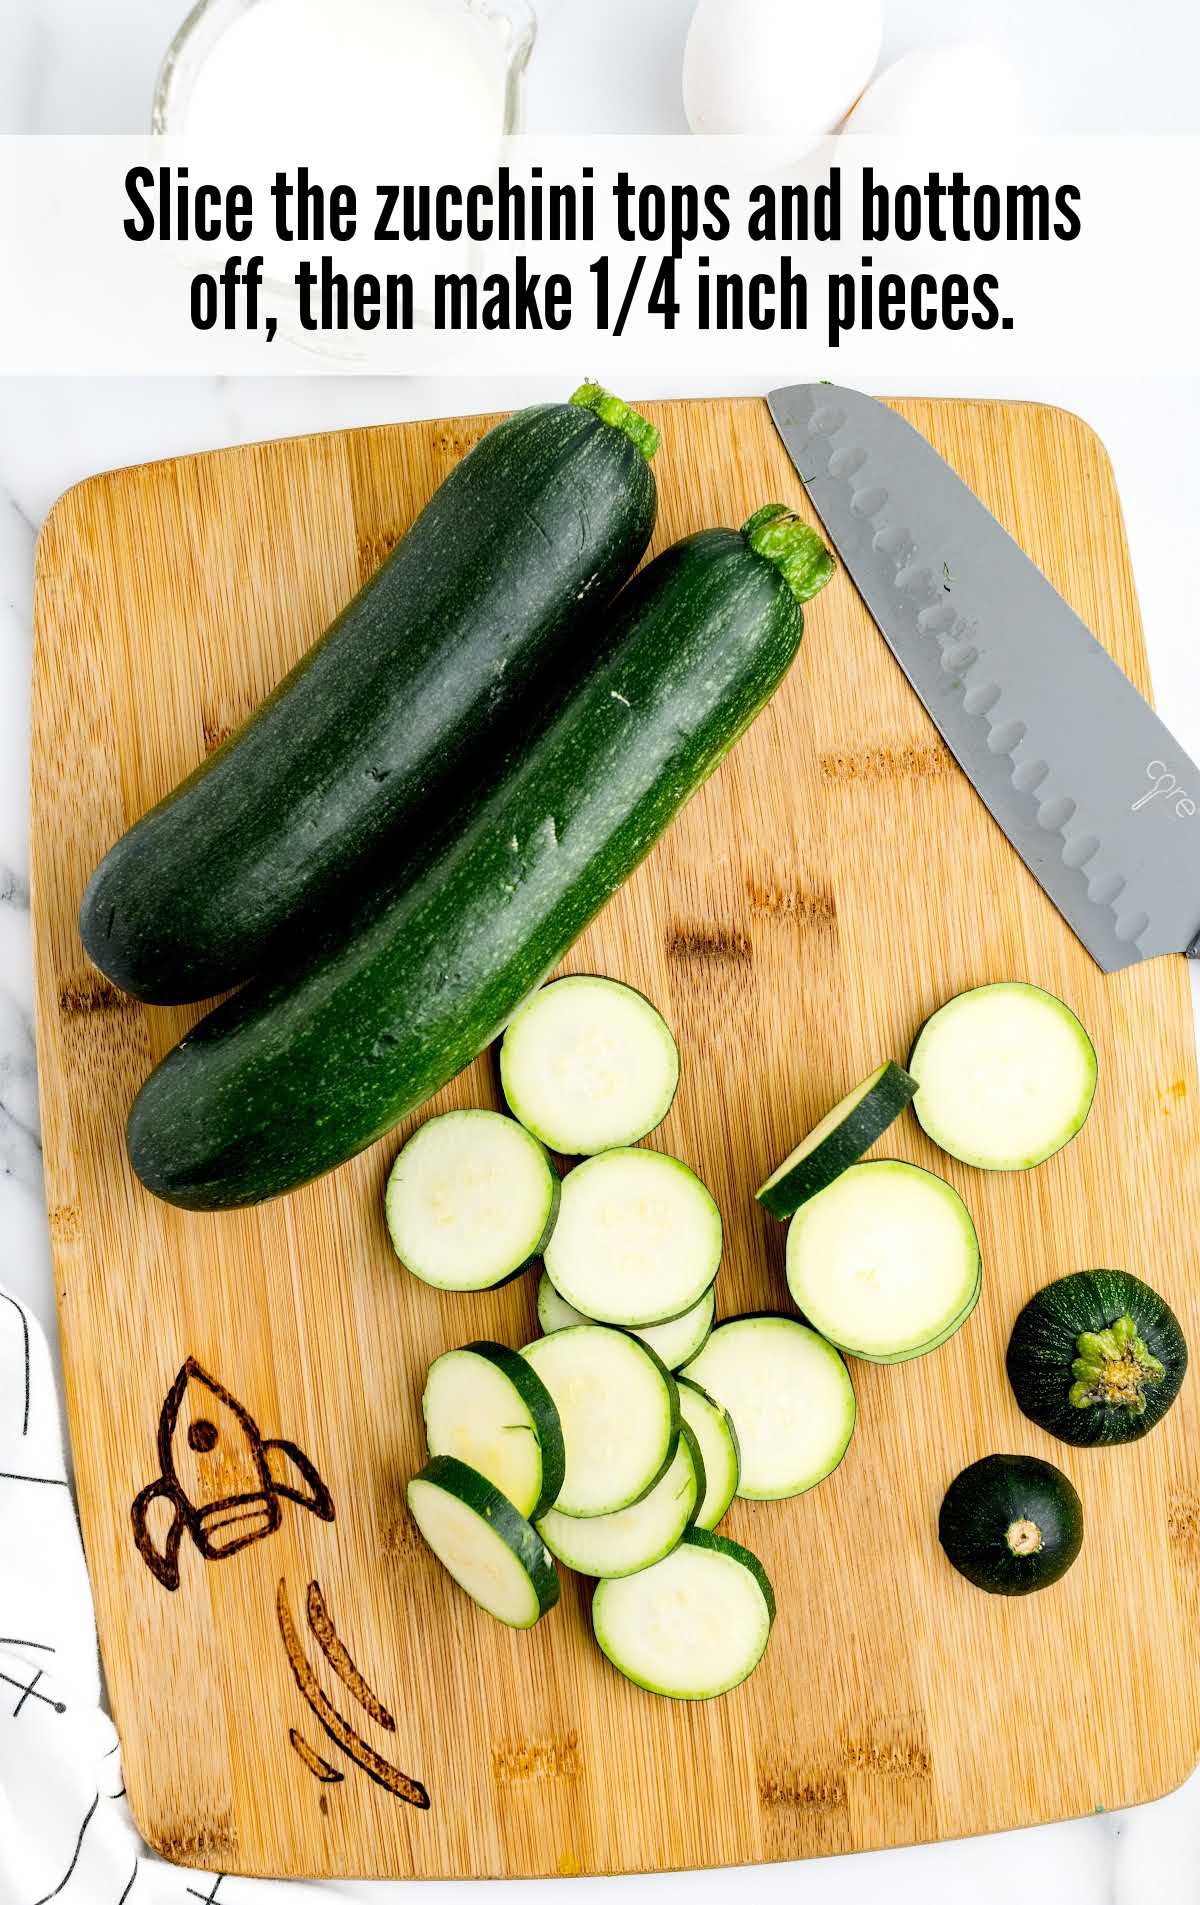 Food on the cutting board, with Fried zucchini